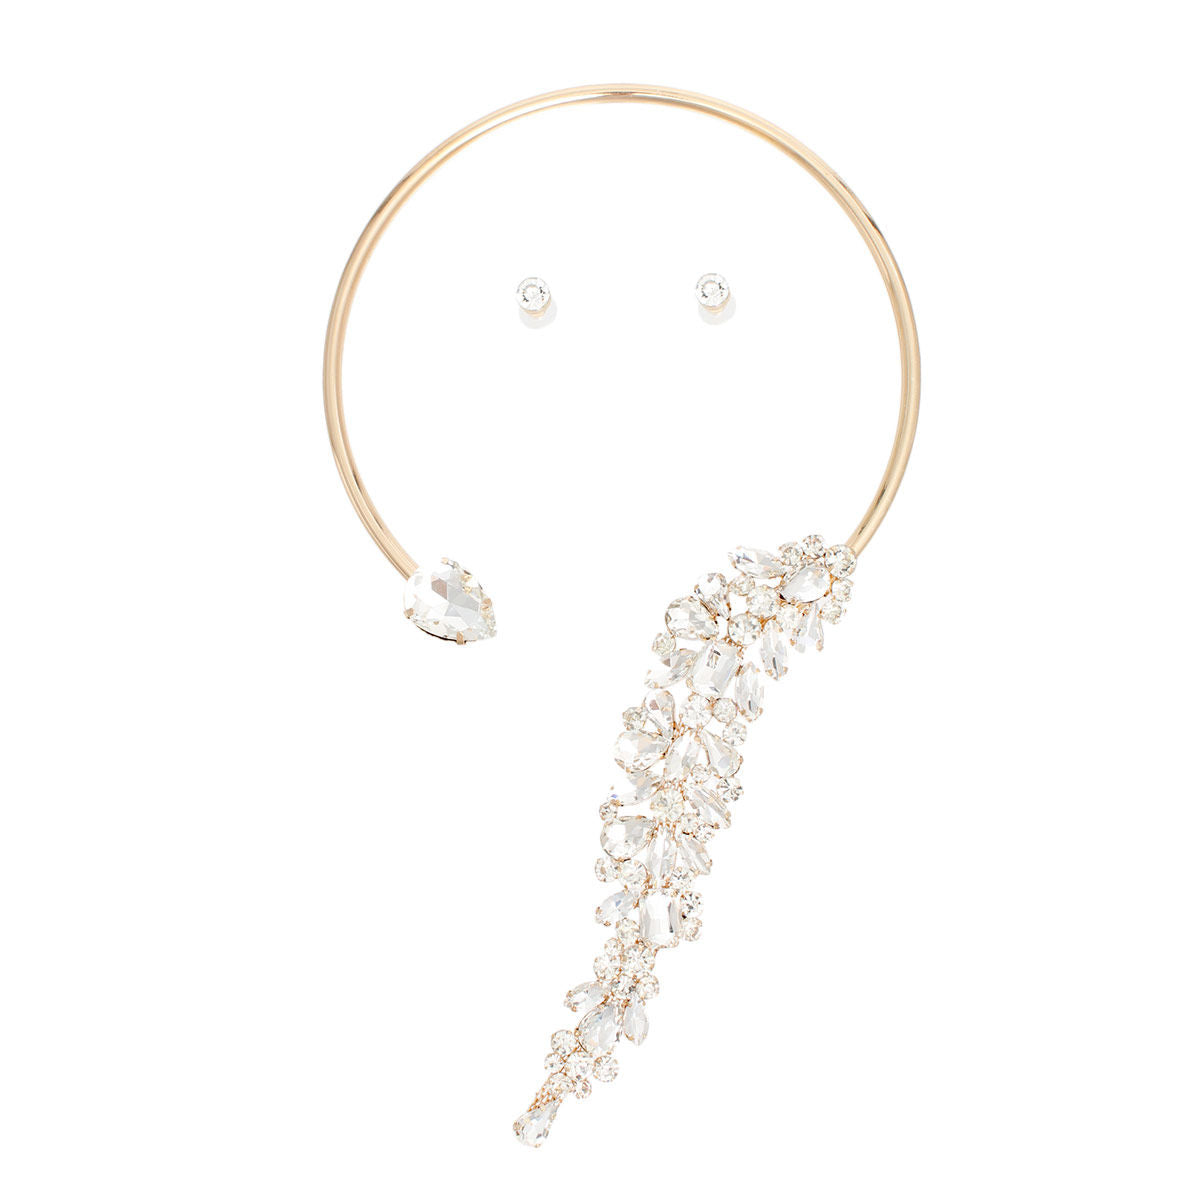 Necklace Gold Crystal Drop Choker for Women